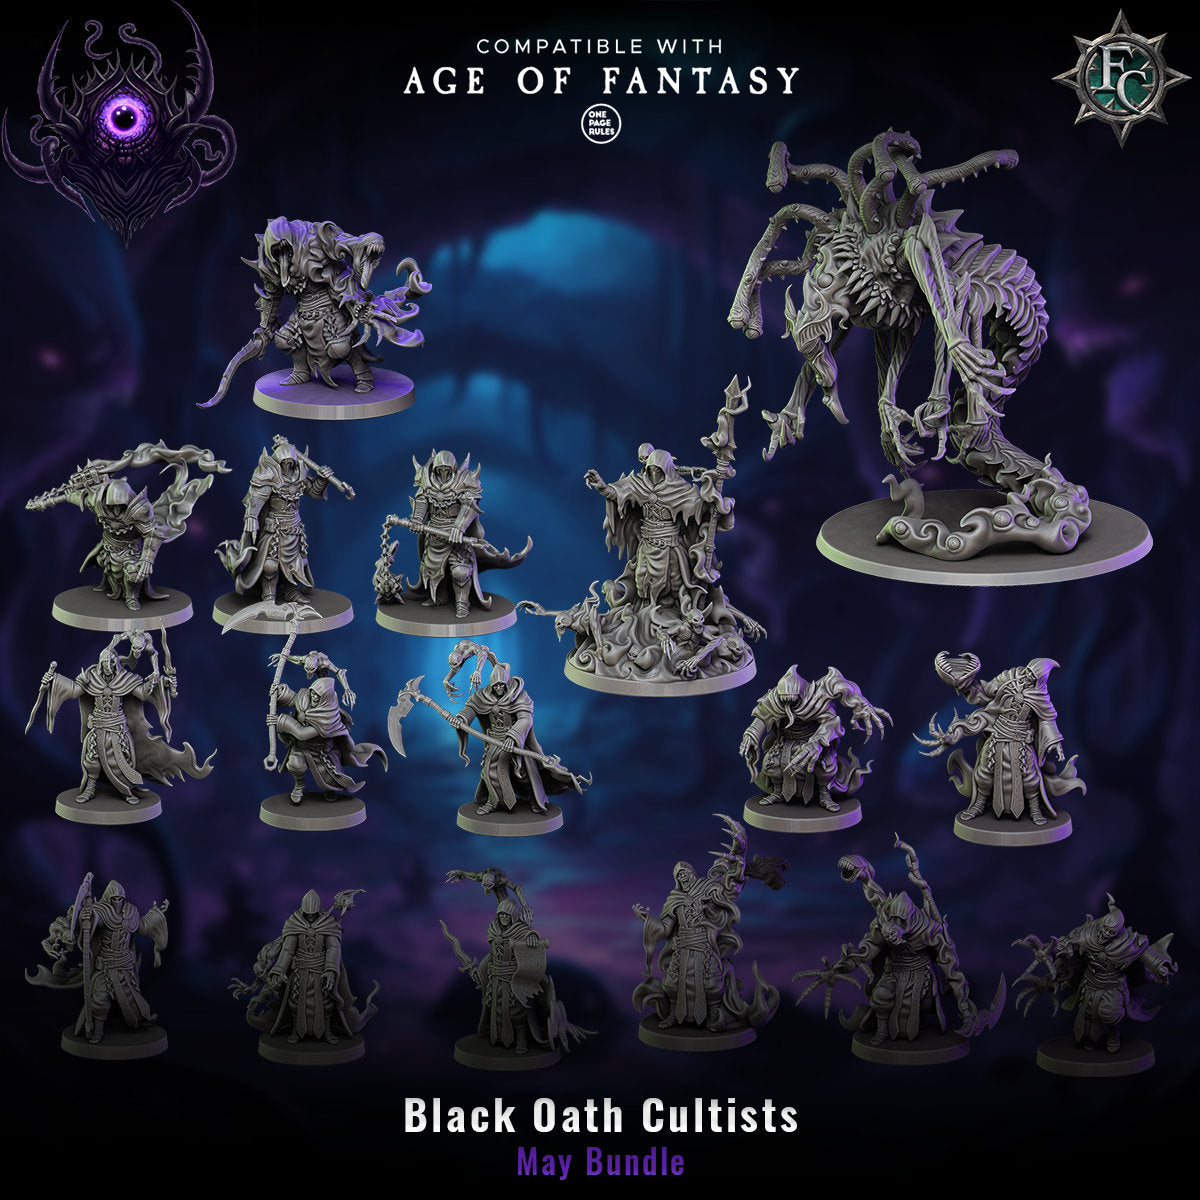 a collection of black death cultists